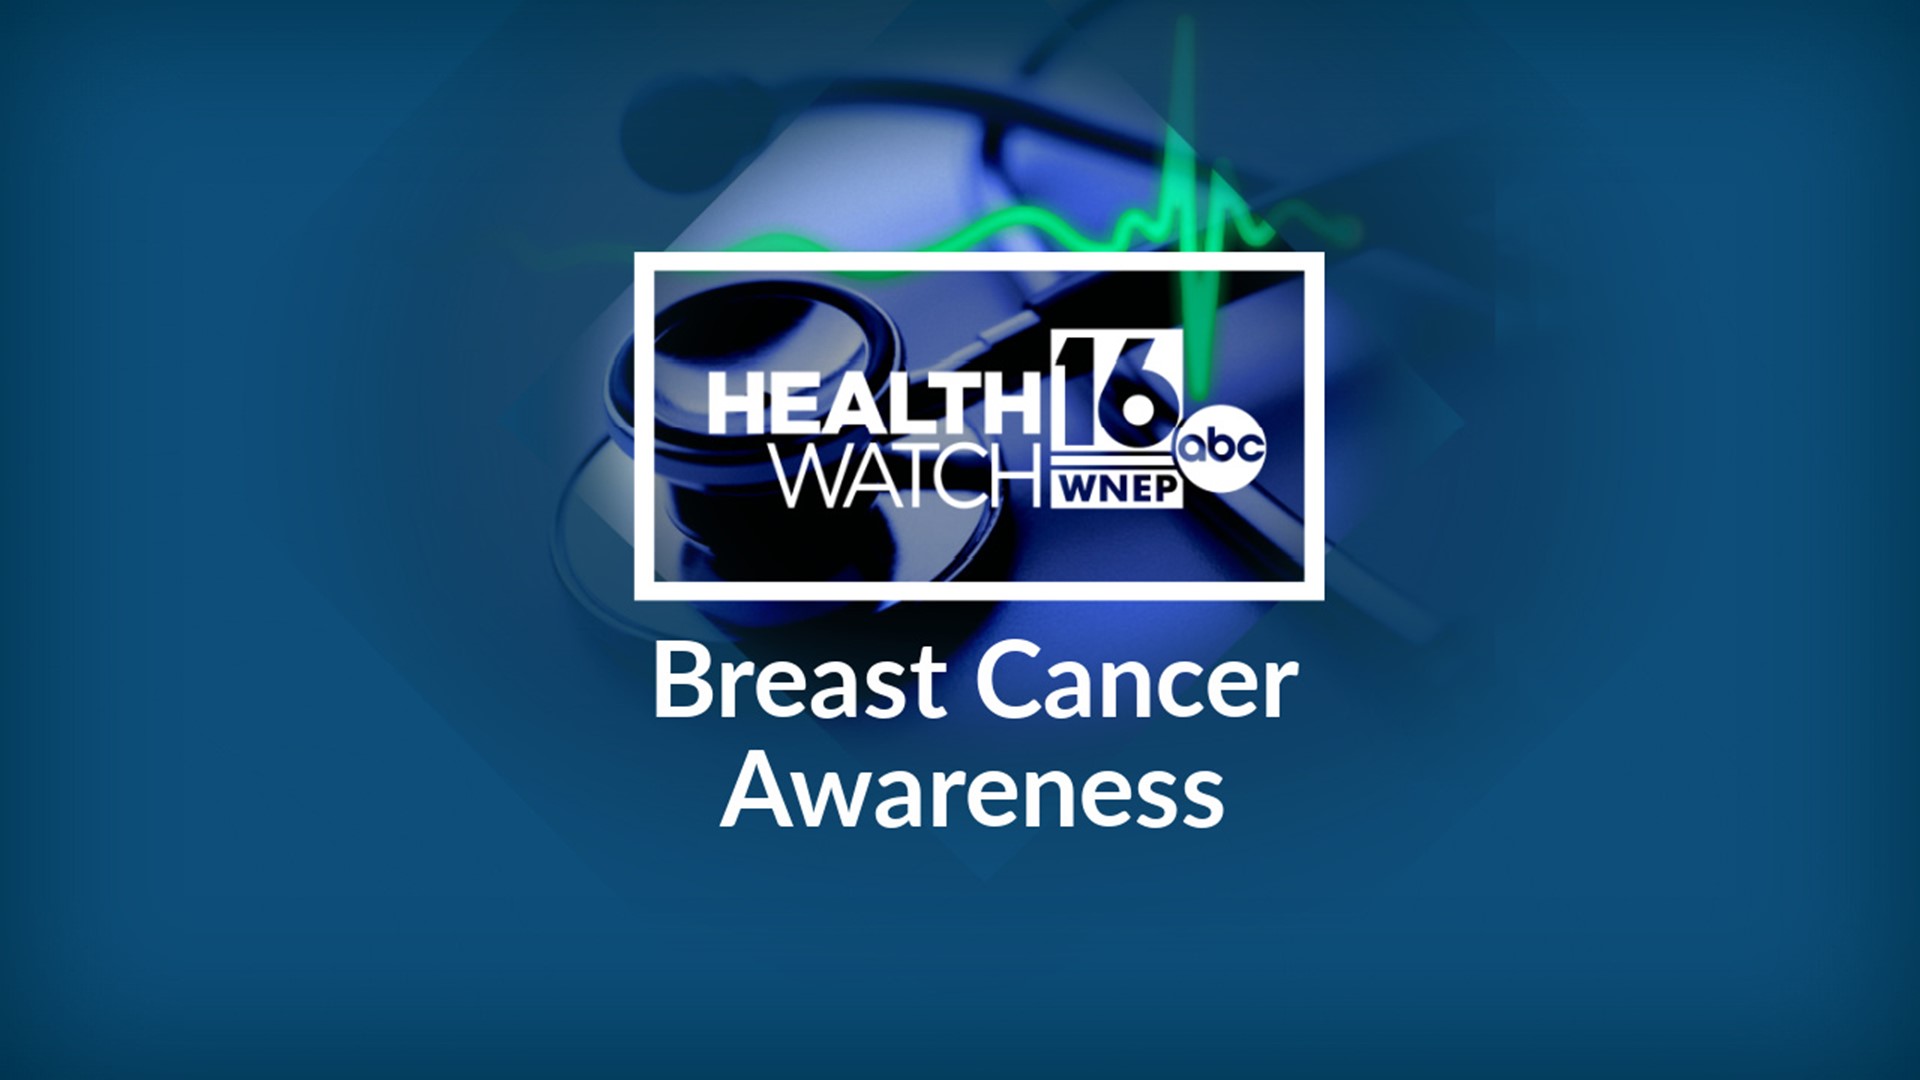 A woman from Luzerne County wanted to share her story this month after a routine mammogram caught her early-stage breast cancer and may have saved her life.